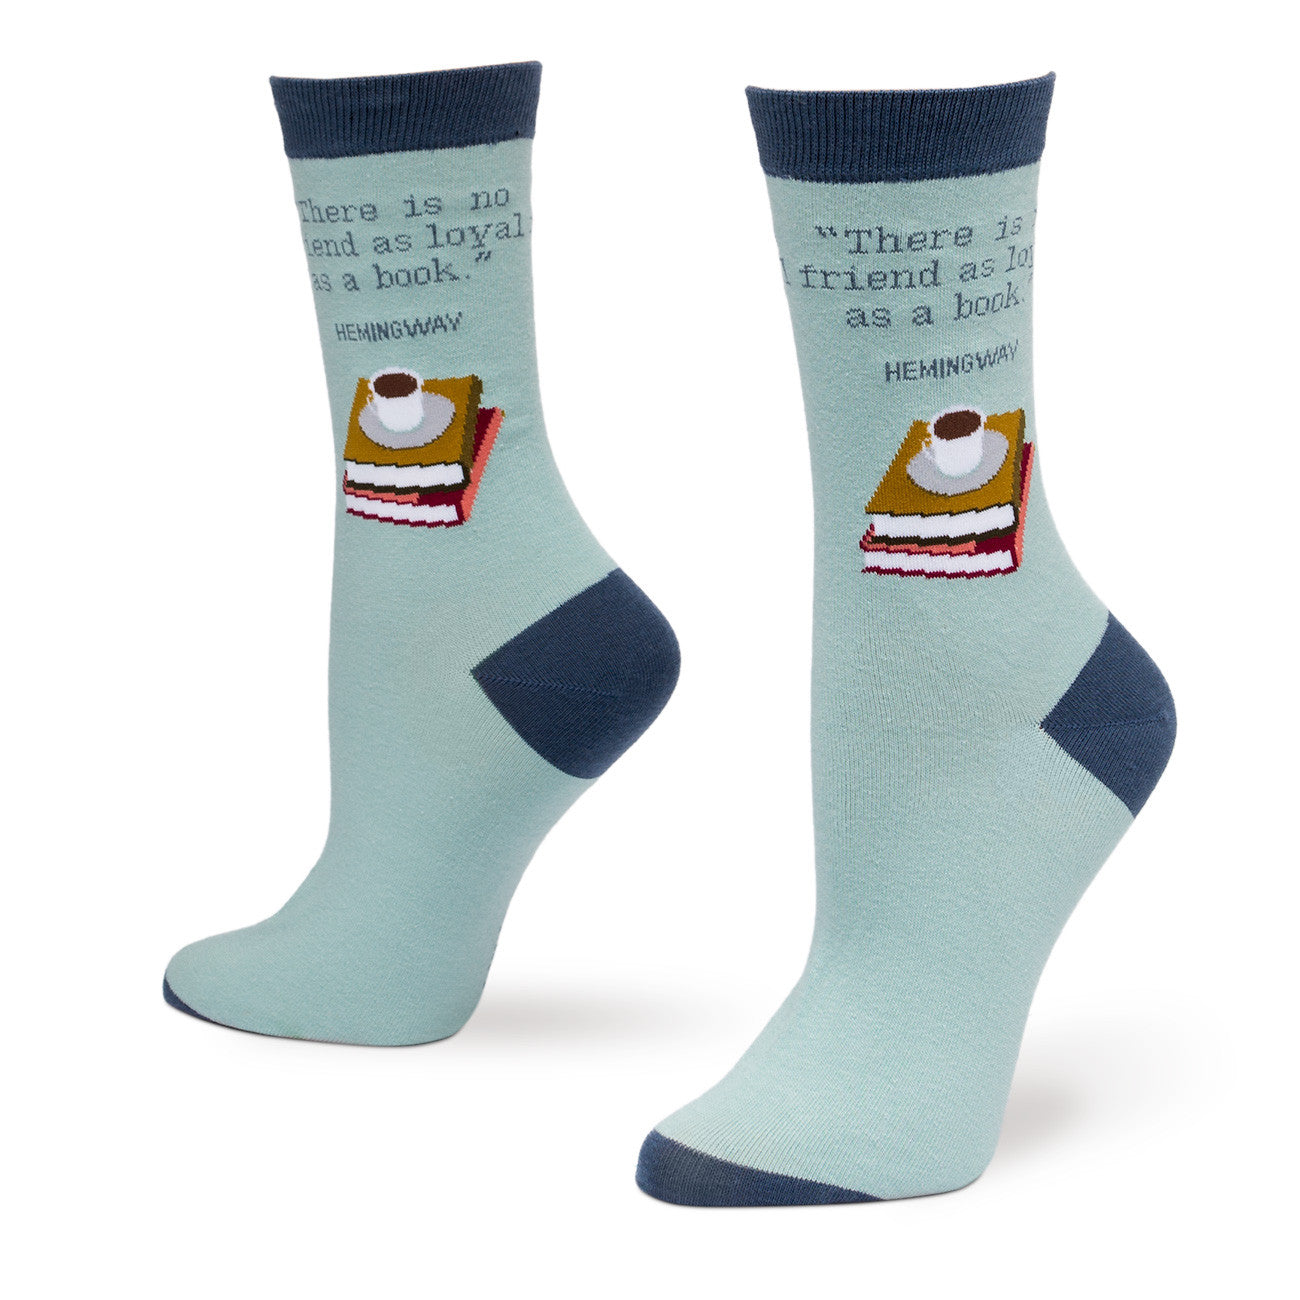 Image result for there is no friend as loyal as a book socks